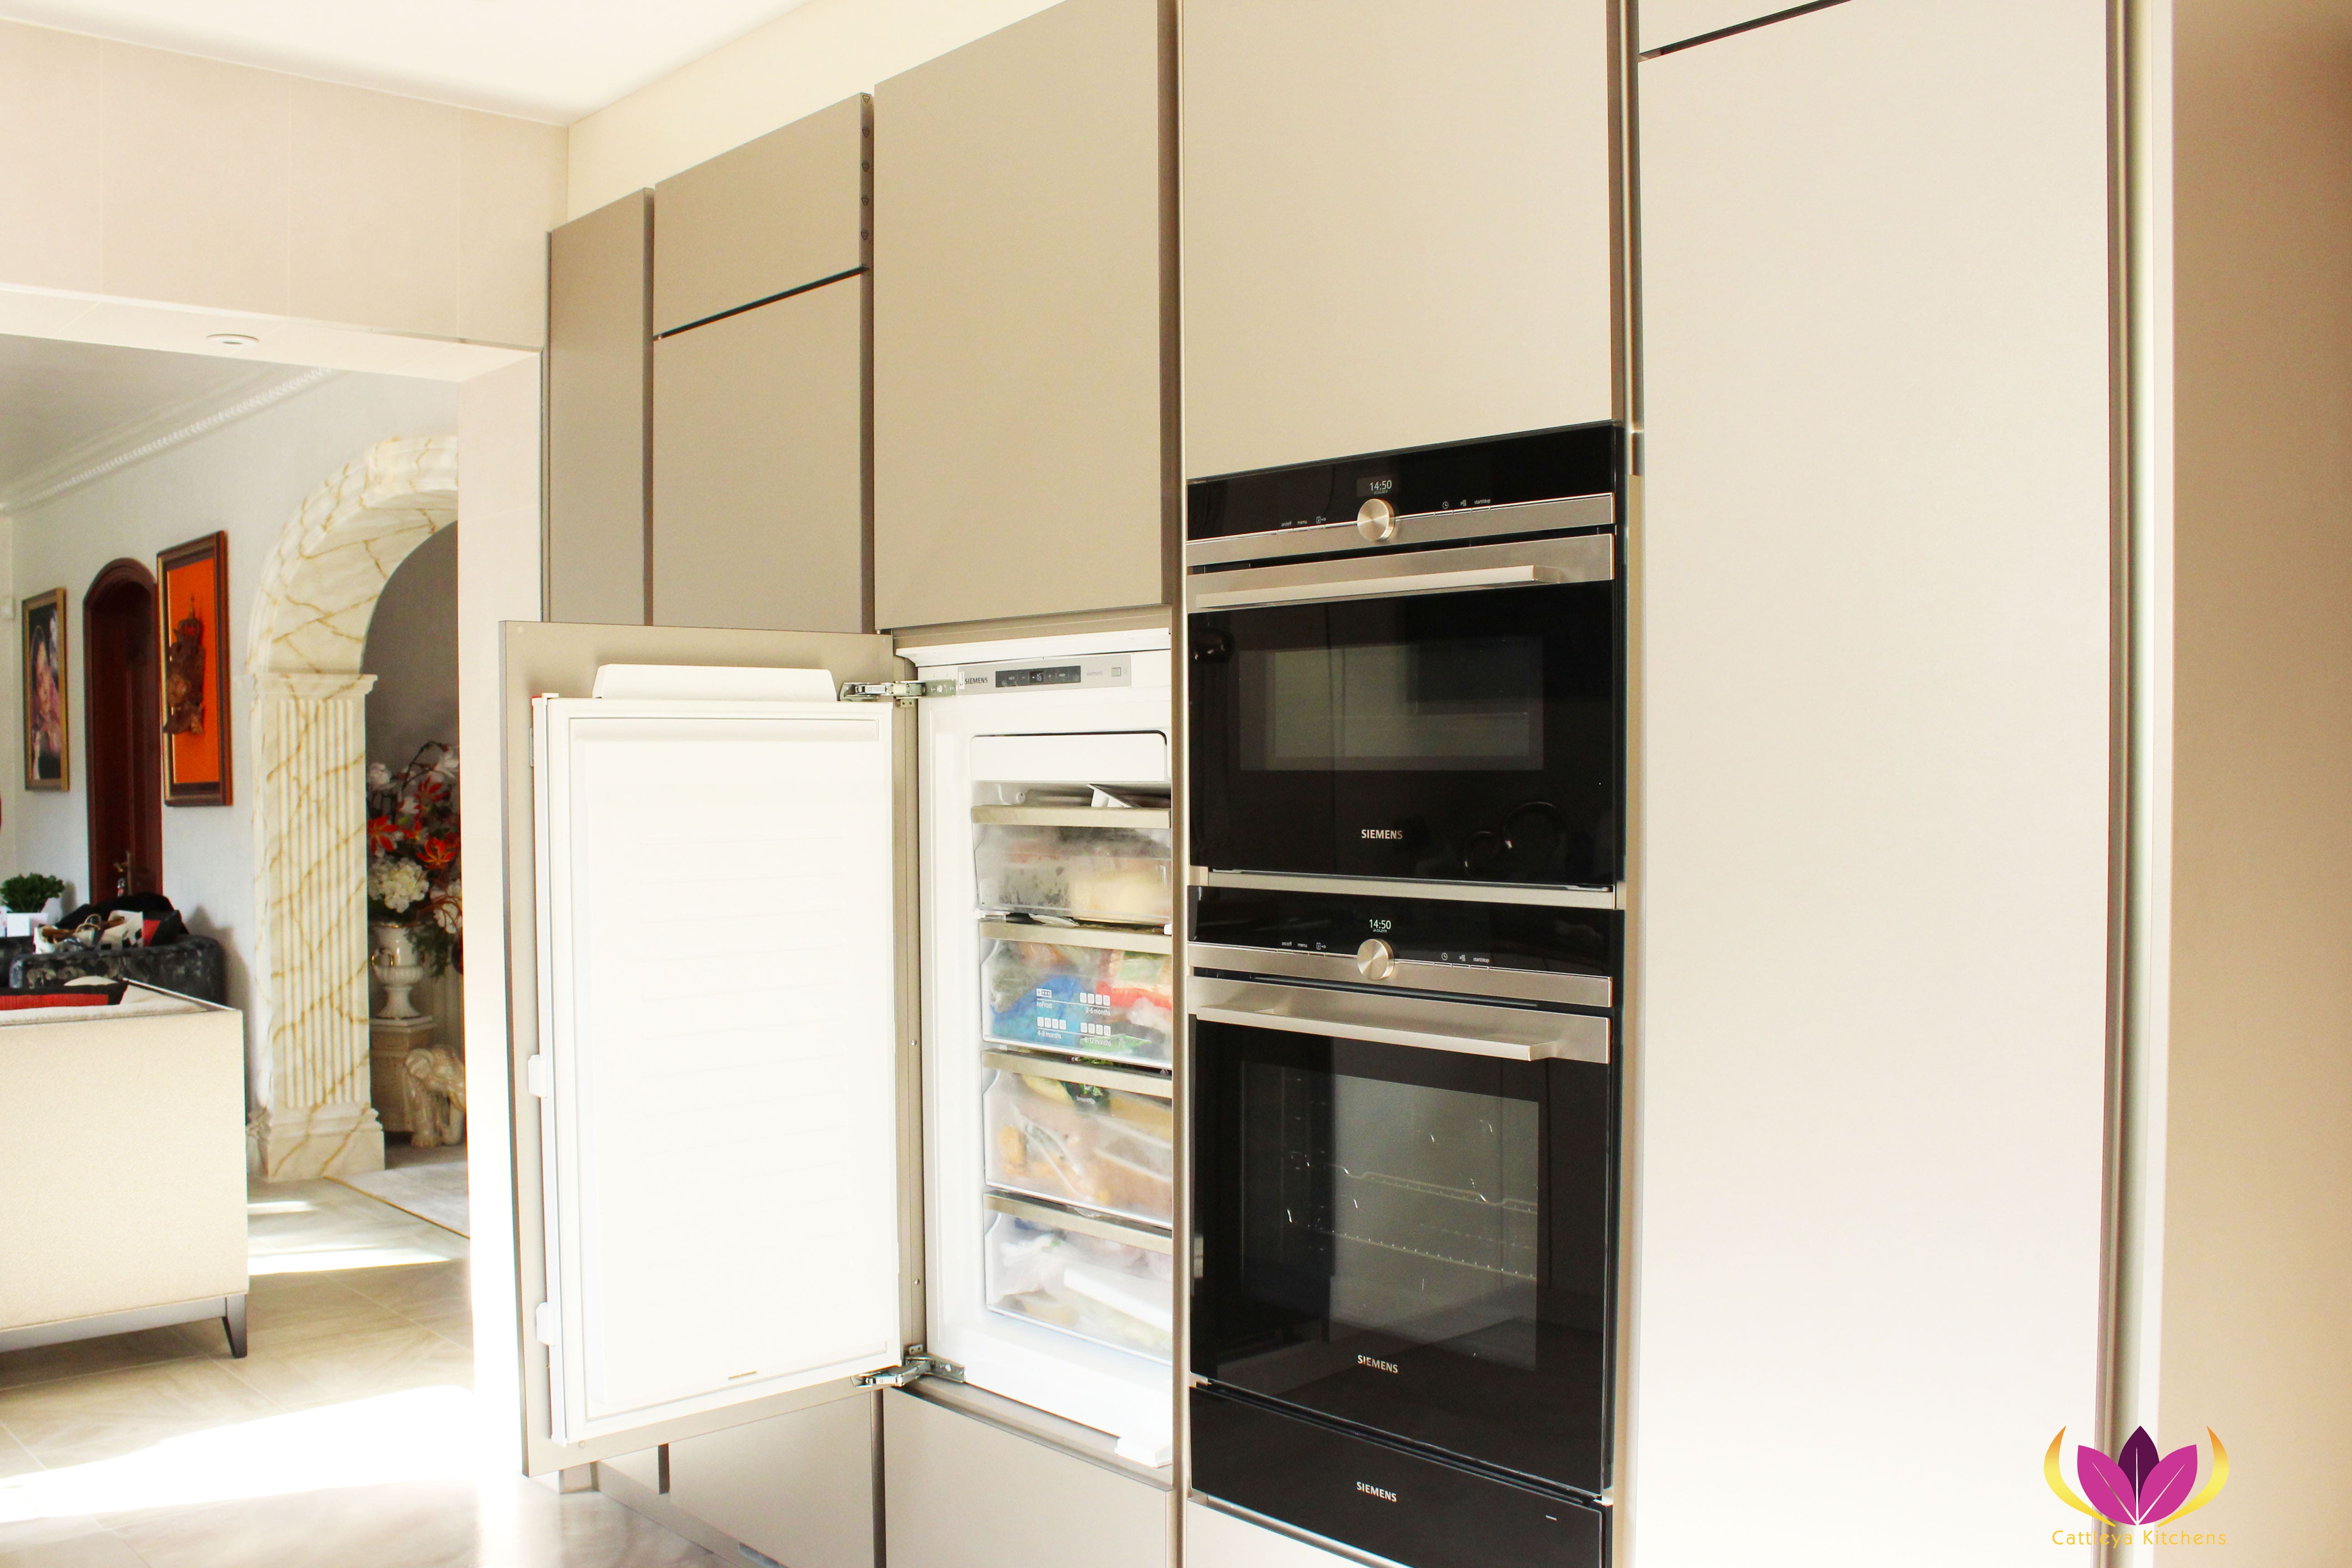 Refriigerator tucked in a cabinet Ealing Finished Kitchen Project